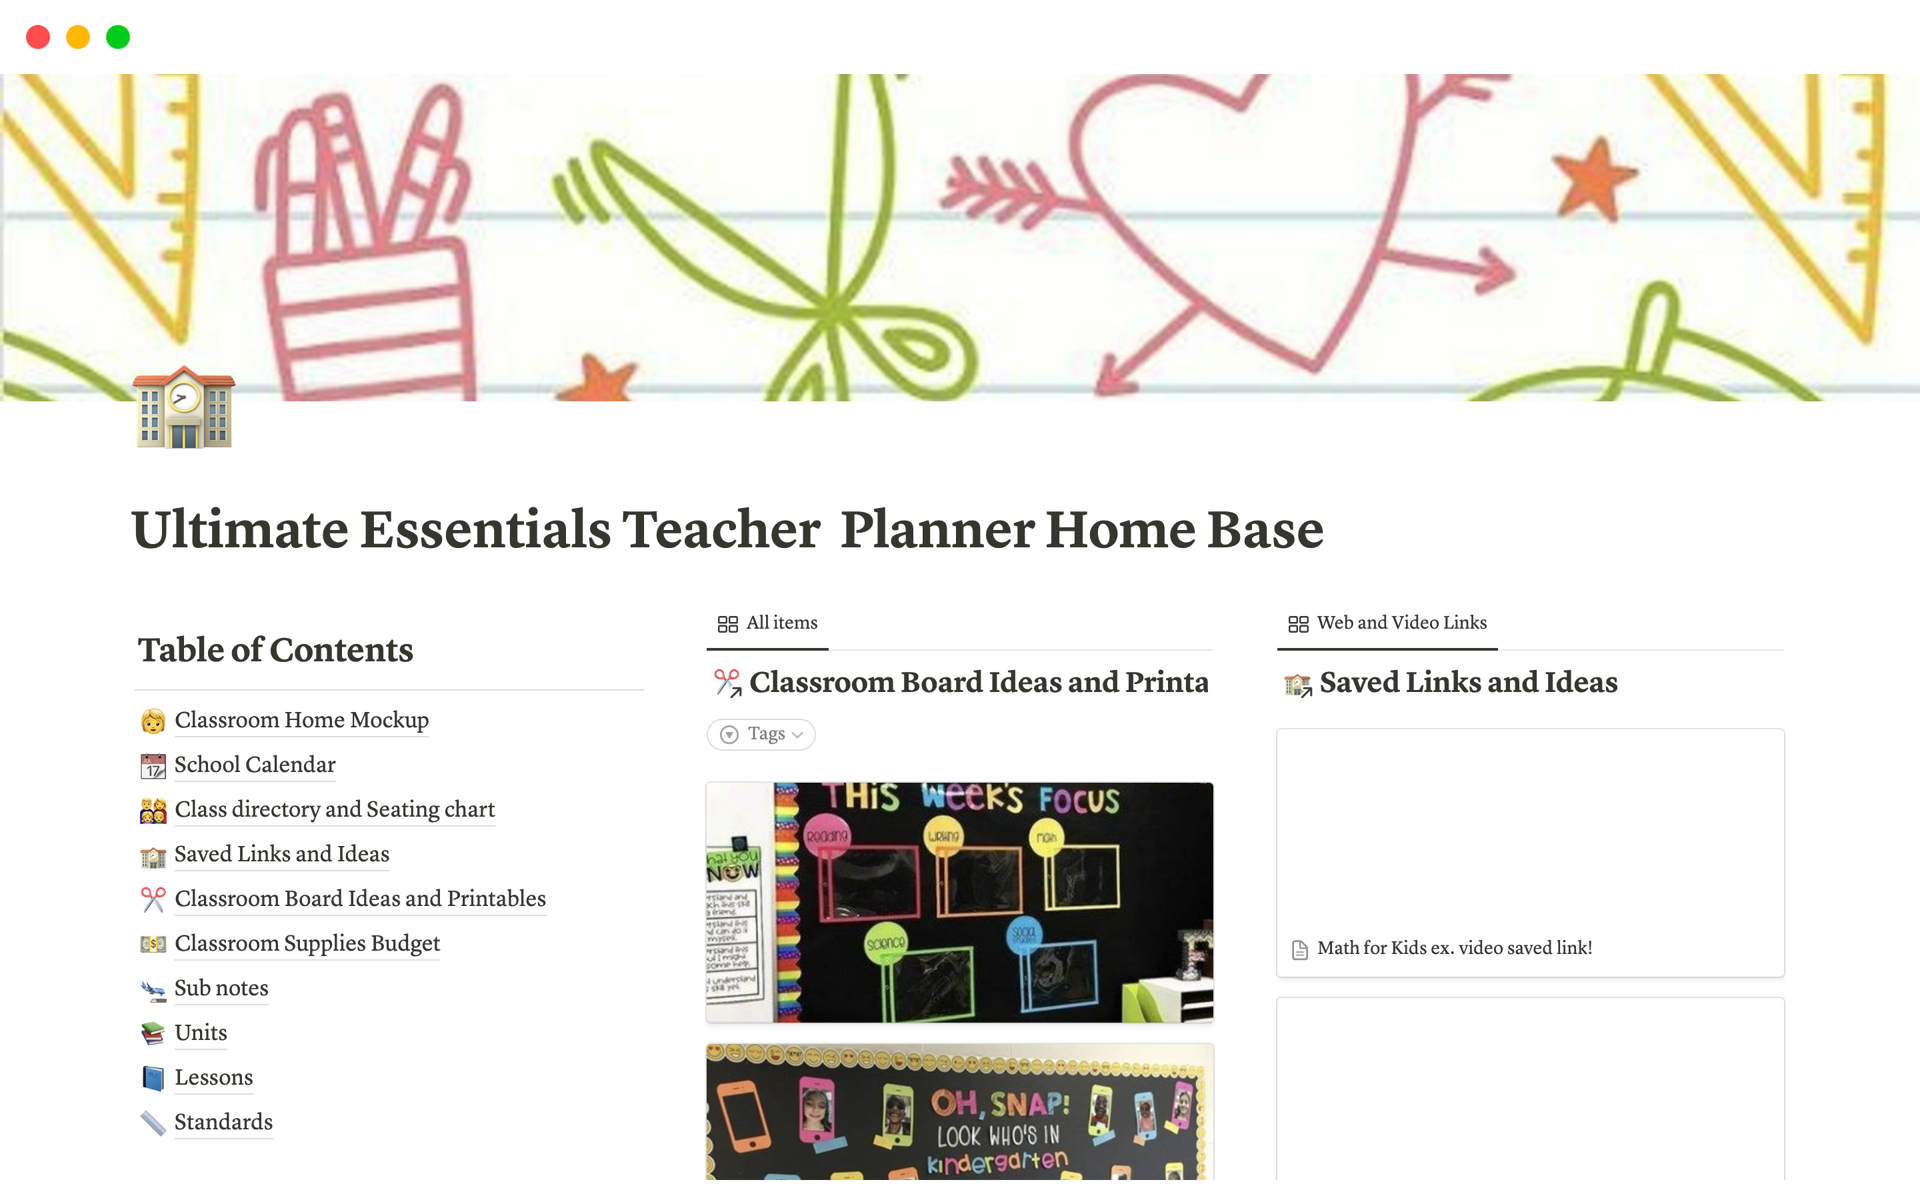 20 Must Have Classroom Supplies to Start Your Room